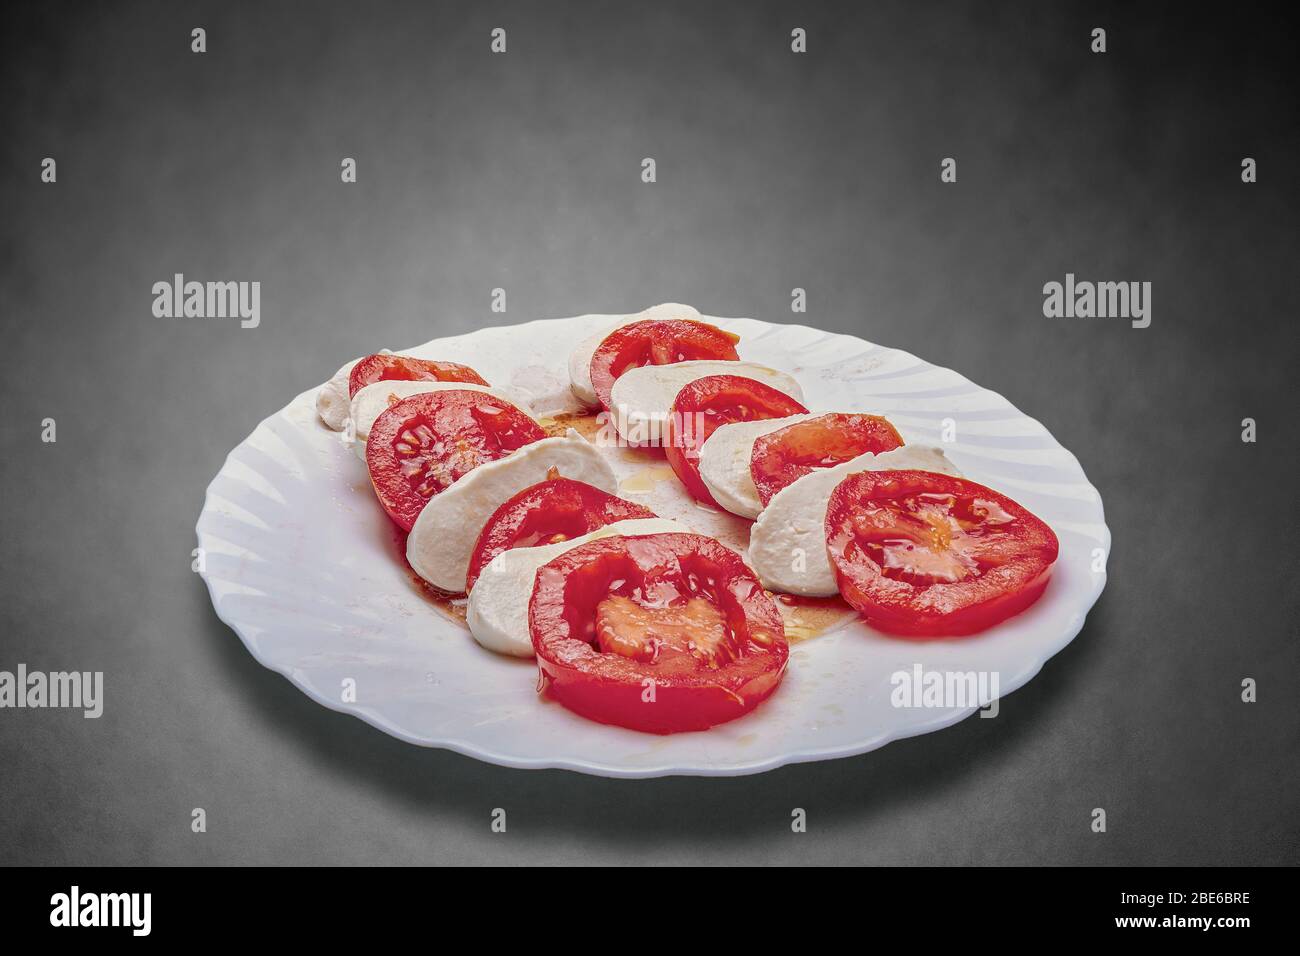 homemade red tomato salad with mozzarella and modena vinegar on white plate with gray textured background Stock Photo